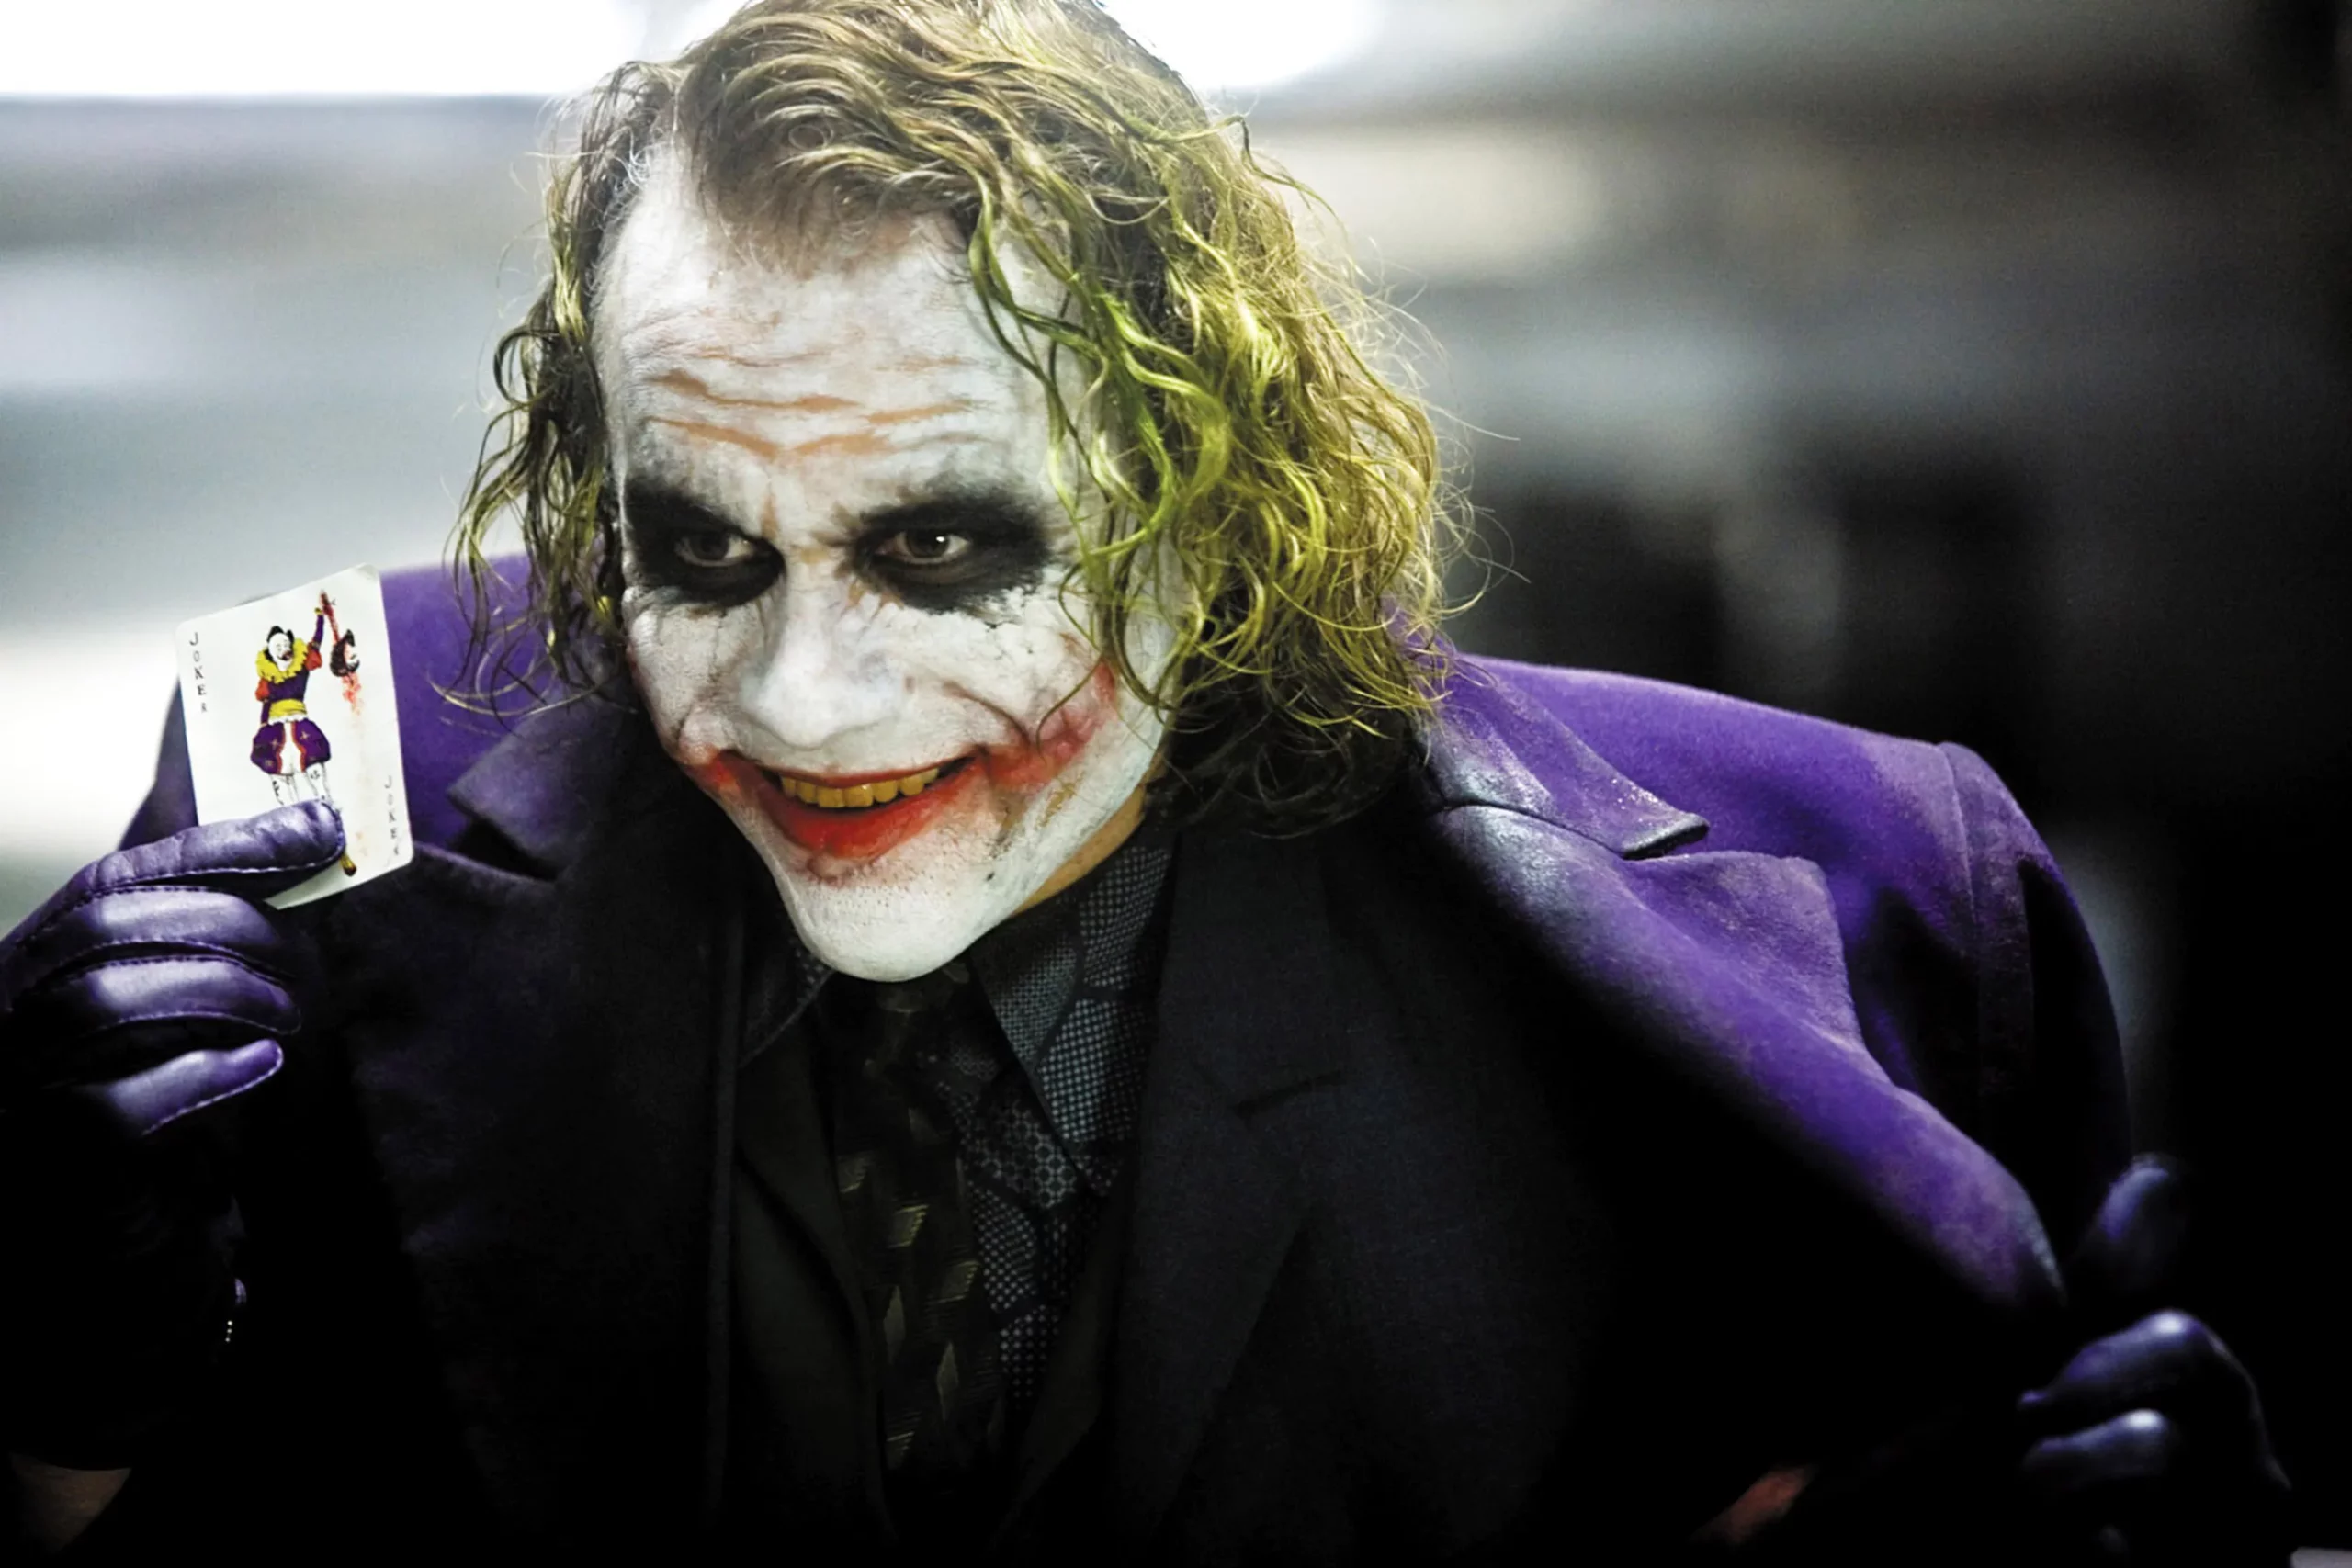 156 Short Joker Quotes on Humanity, Life & Love